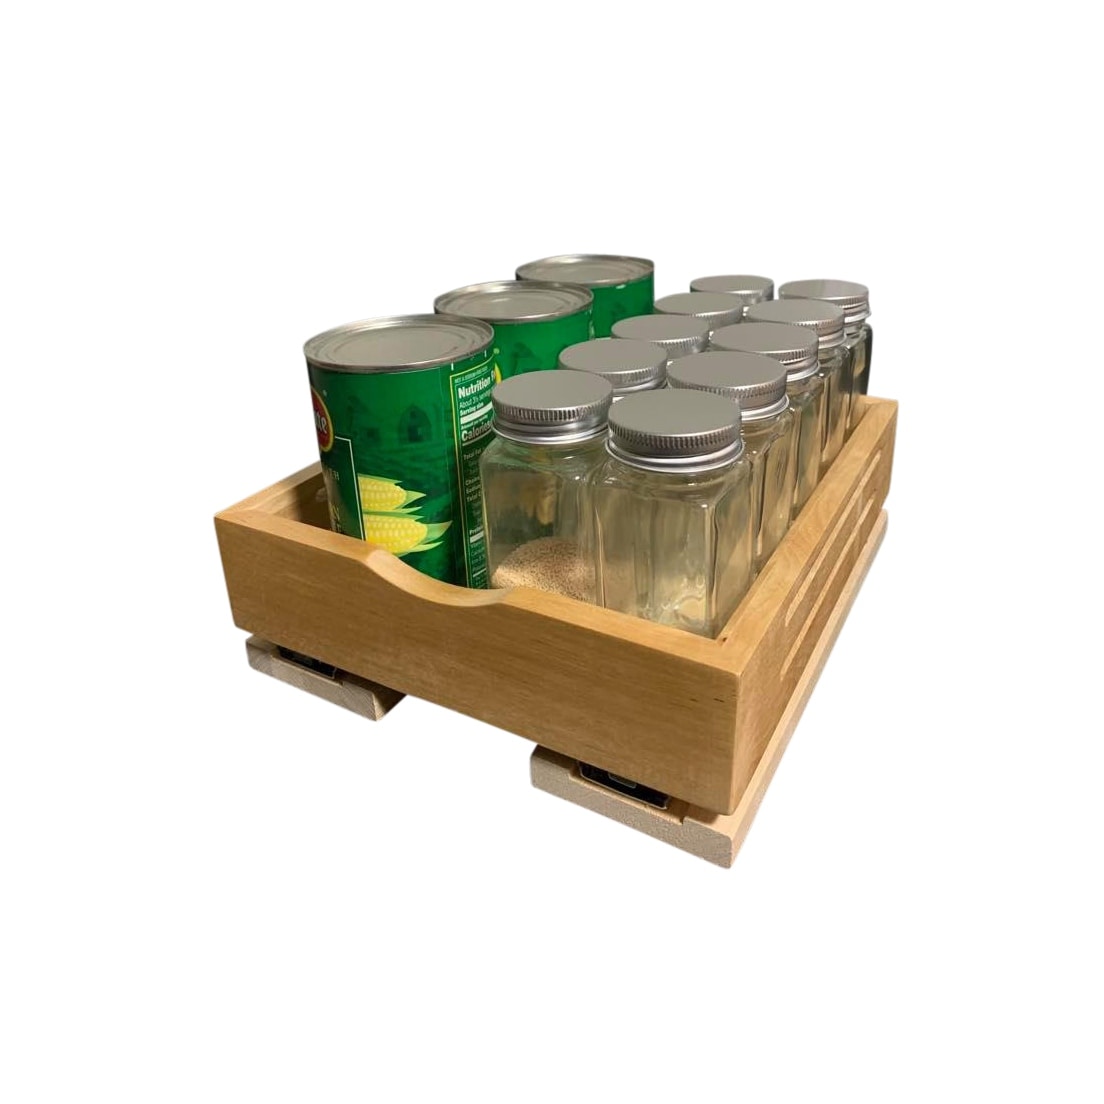 https://ak1.ostkcdn.com/images/products/is/images/direct/b92abc28036d918d8c315696405b6c00323f19c6/CabinetRTA-Wood-Pull-Out-Spice-Rack-Organizer-for-Cabinet-for-Sauces%2C-Canned-Food-etc%E2%80%A6.jpg